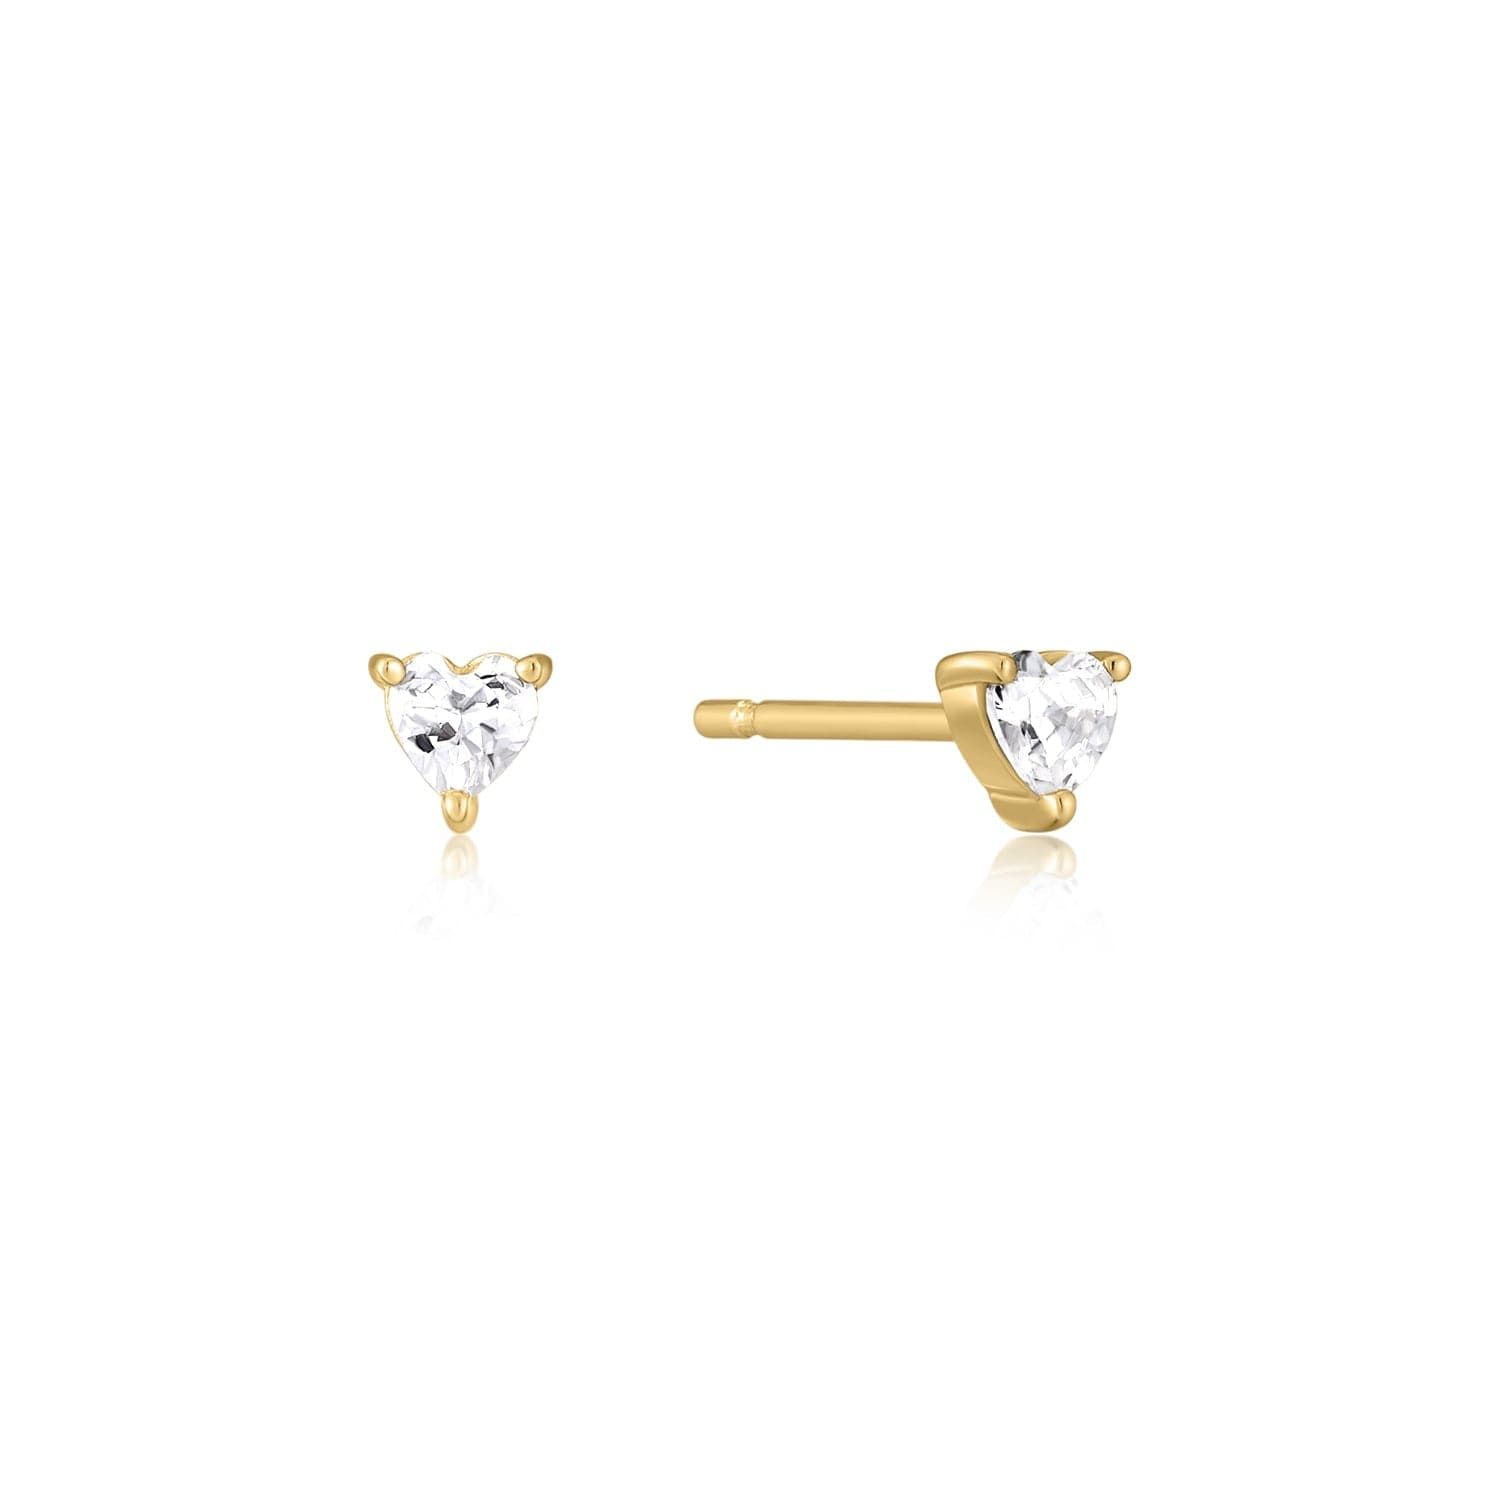 a pair of gold earrings with a single diamond